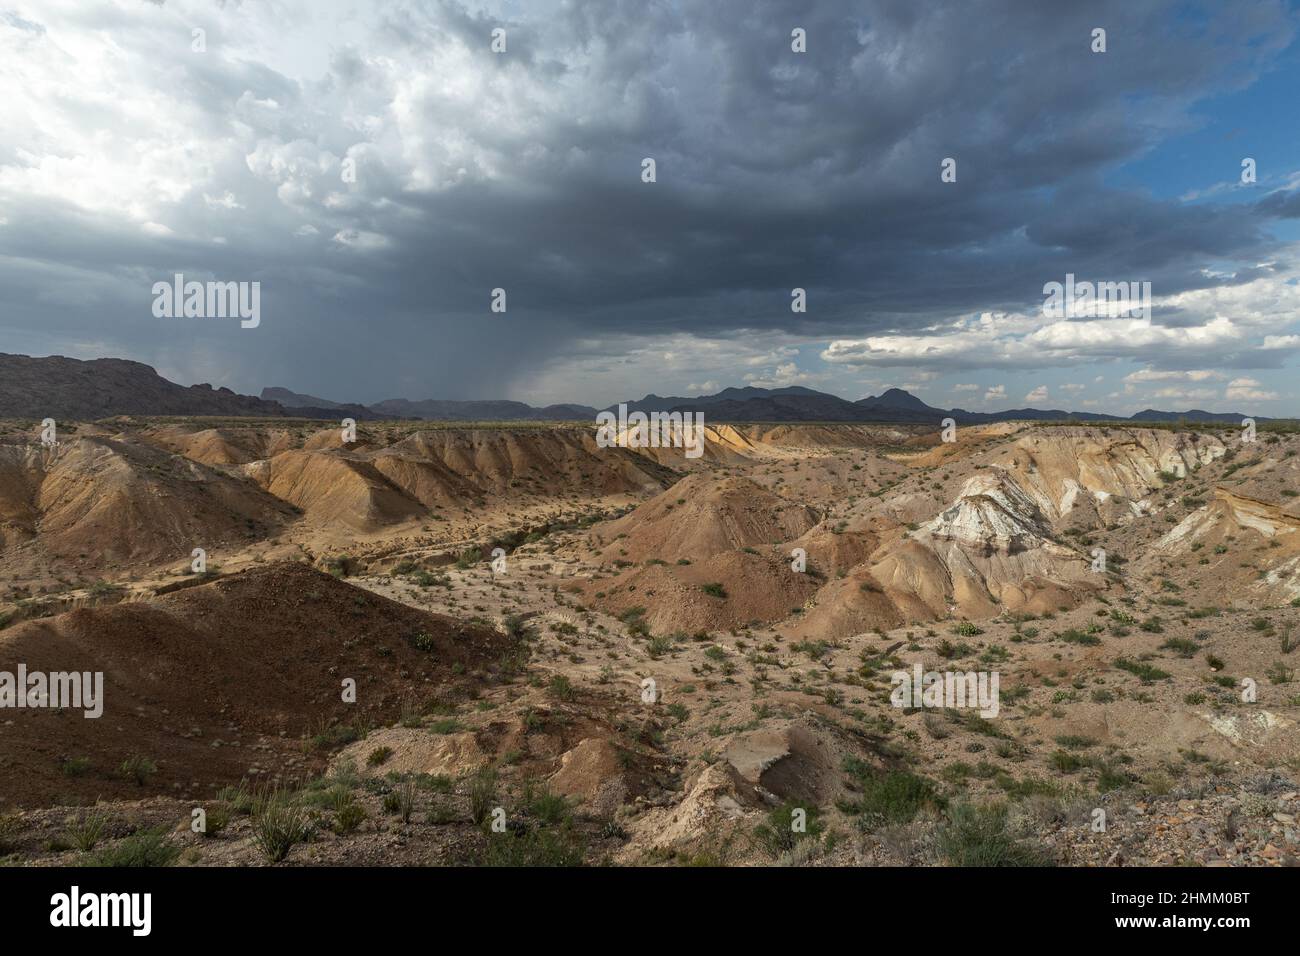 During the summer monsoon, thunderstorms drench a small area of the desert. Runoff erodes the Cretaceous rock formations to create badlands. Stock Photo